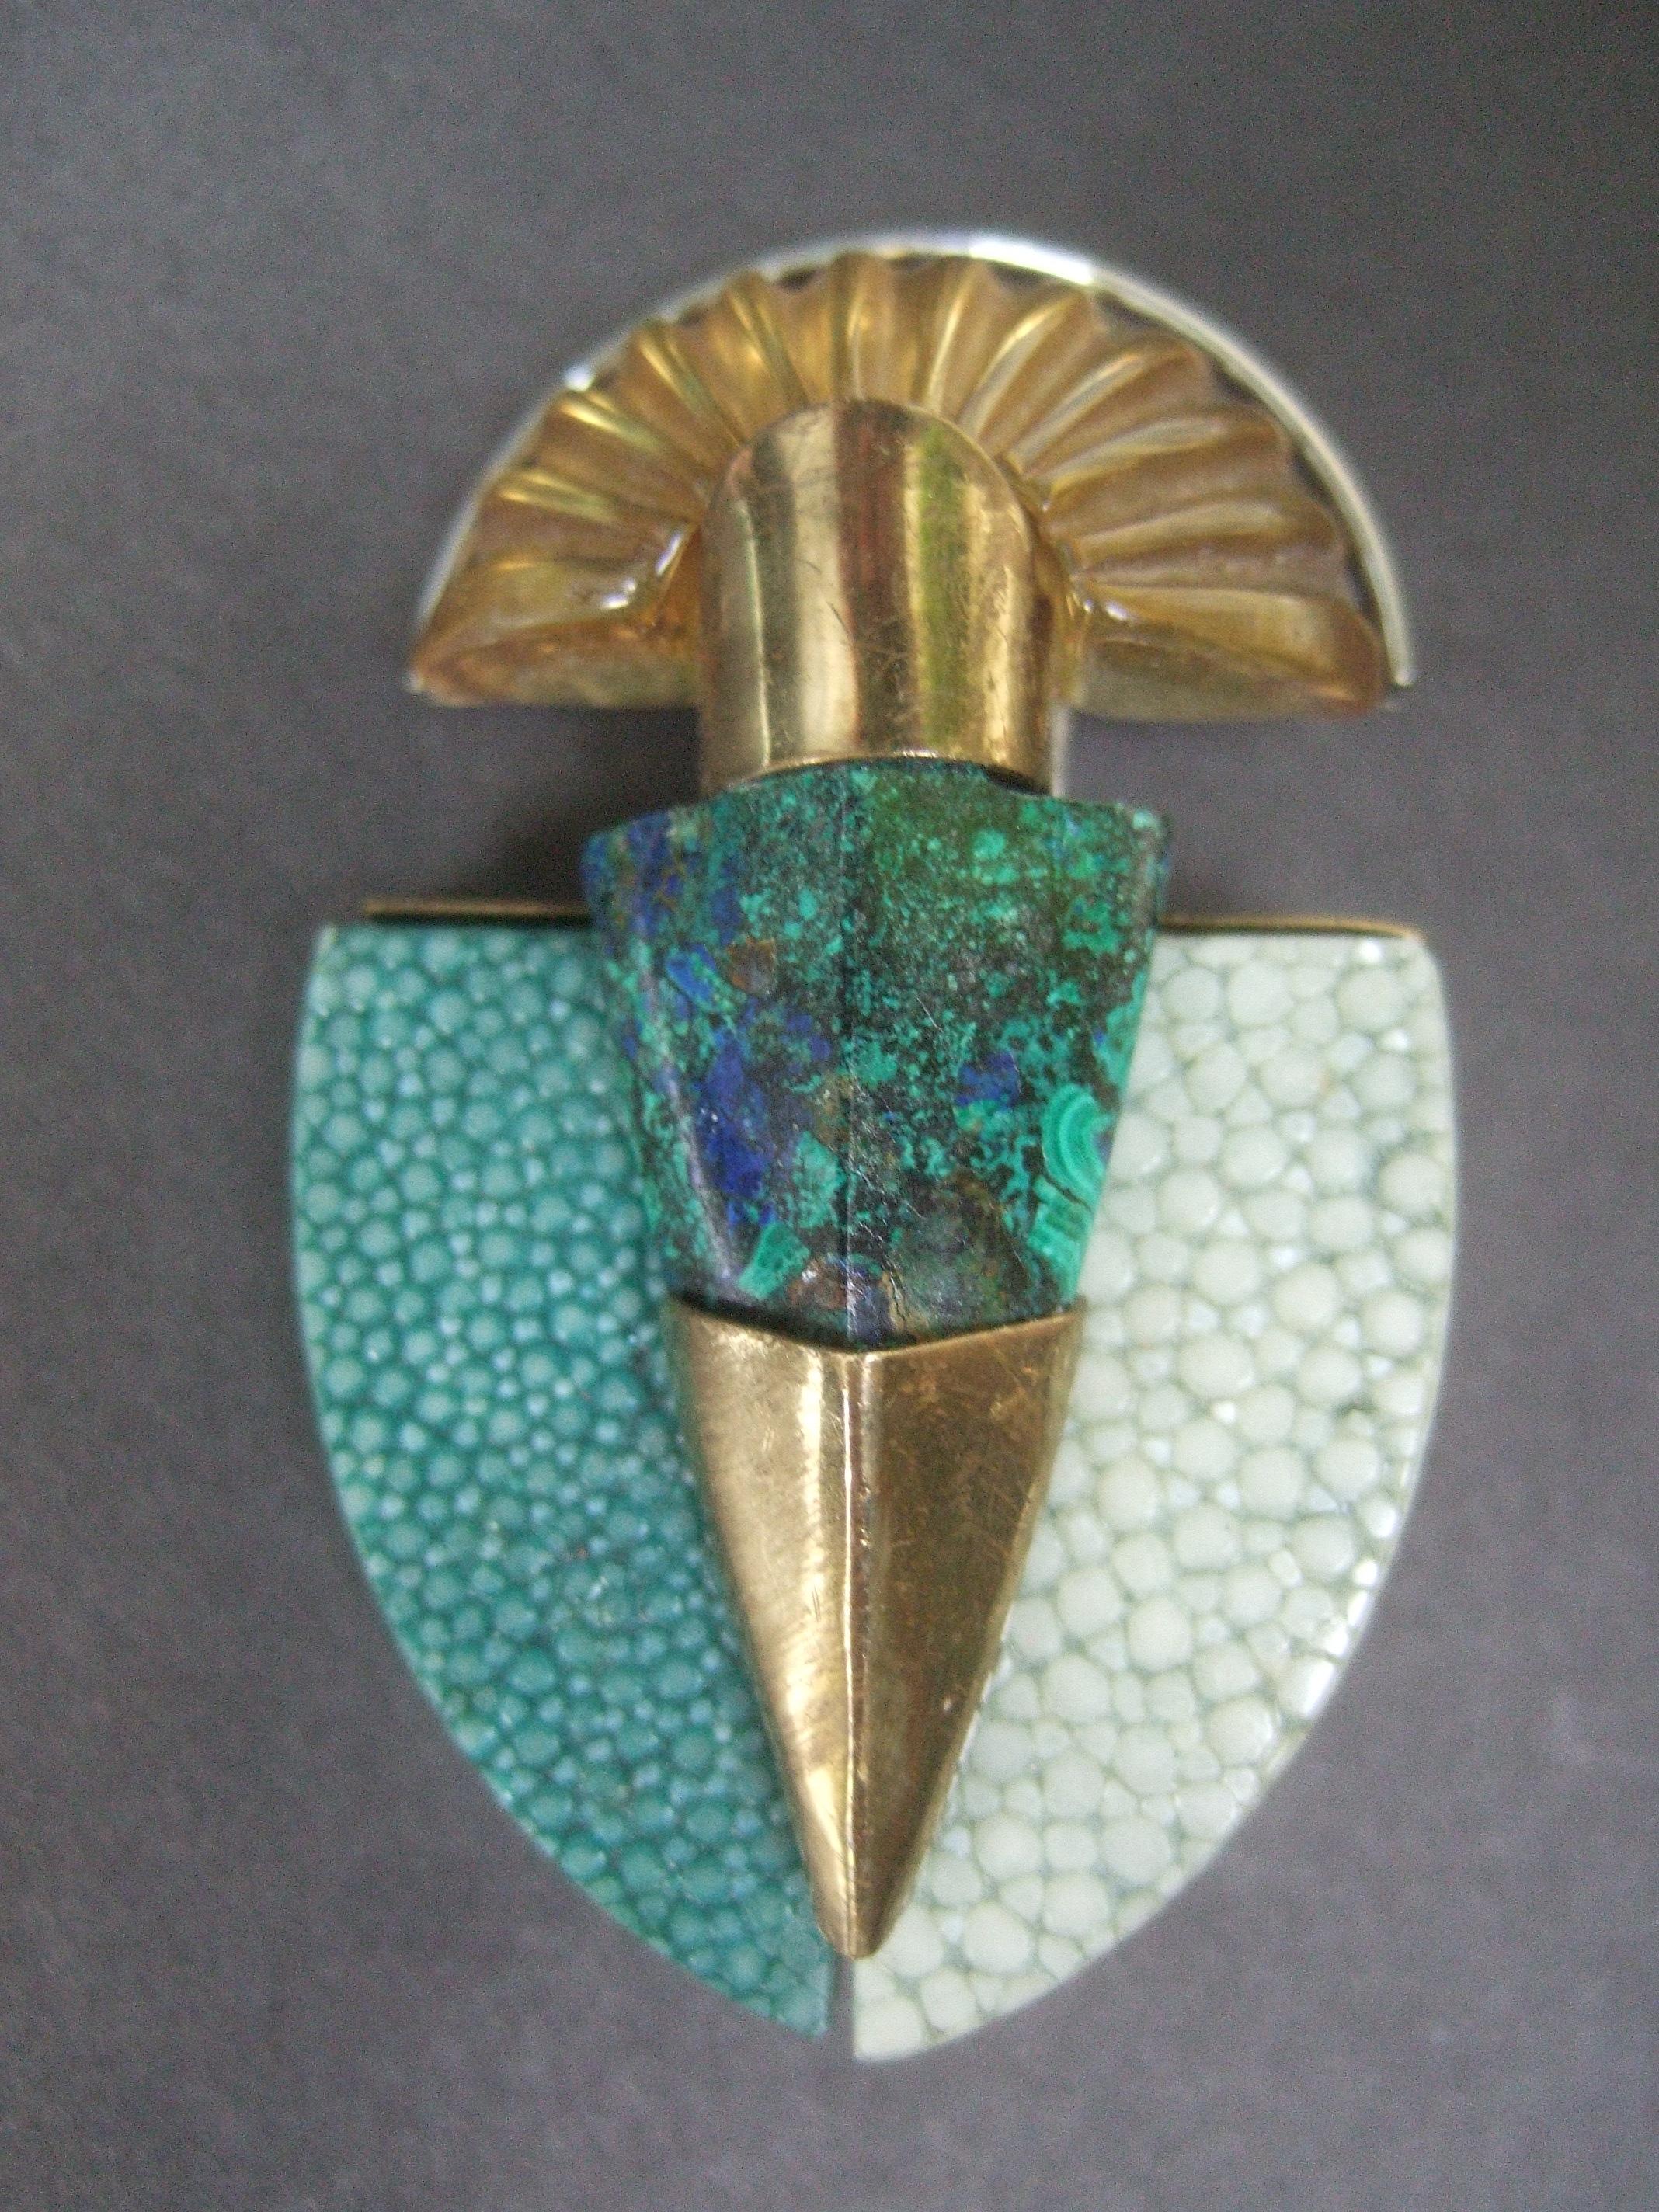 Fabrice Paris Avant-garde malachite stone & resin lucite gilt metal brooch c 1970

The elegant French brooch is designed with a geometric cut malachite stone in the center anchored with brass tone metal hardware. The upper section has a translucent